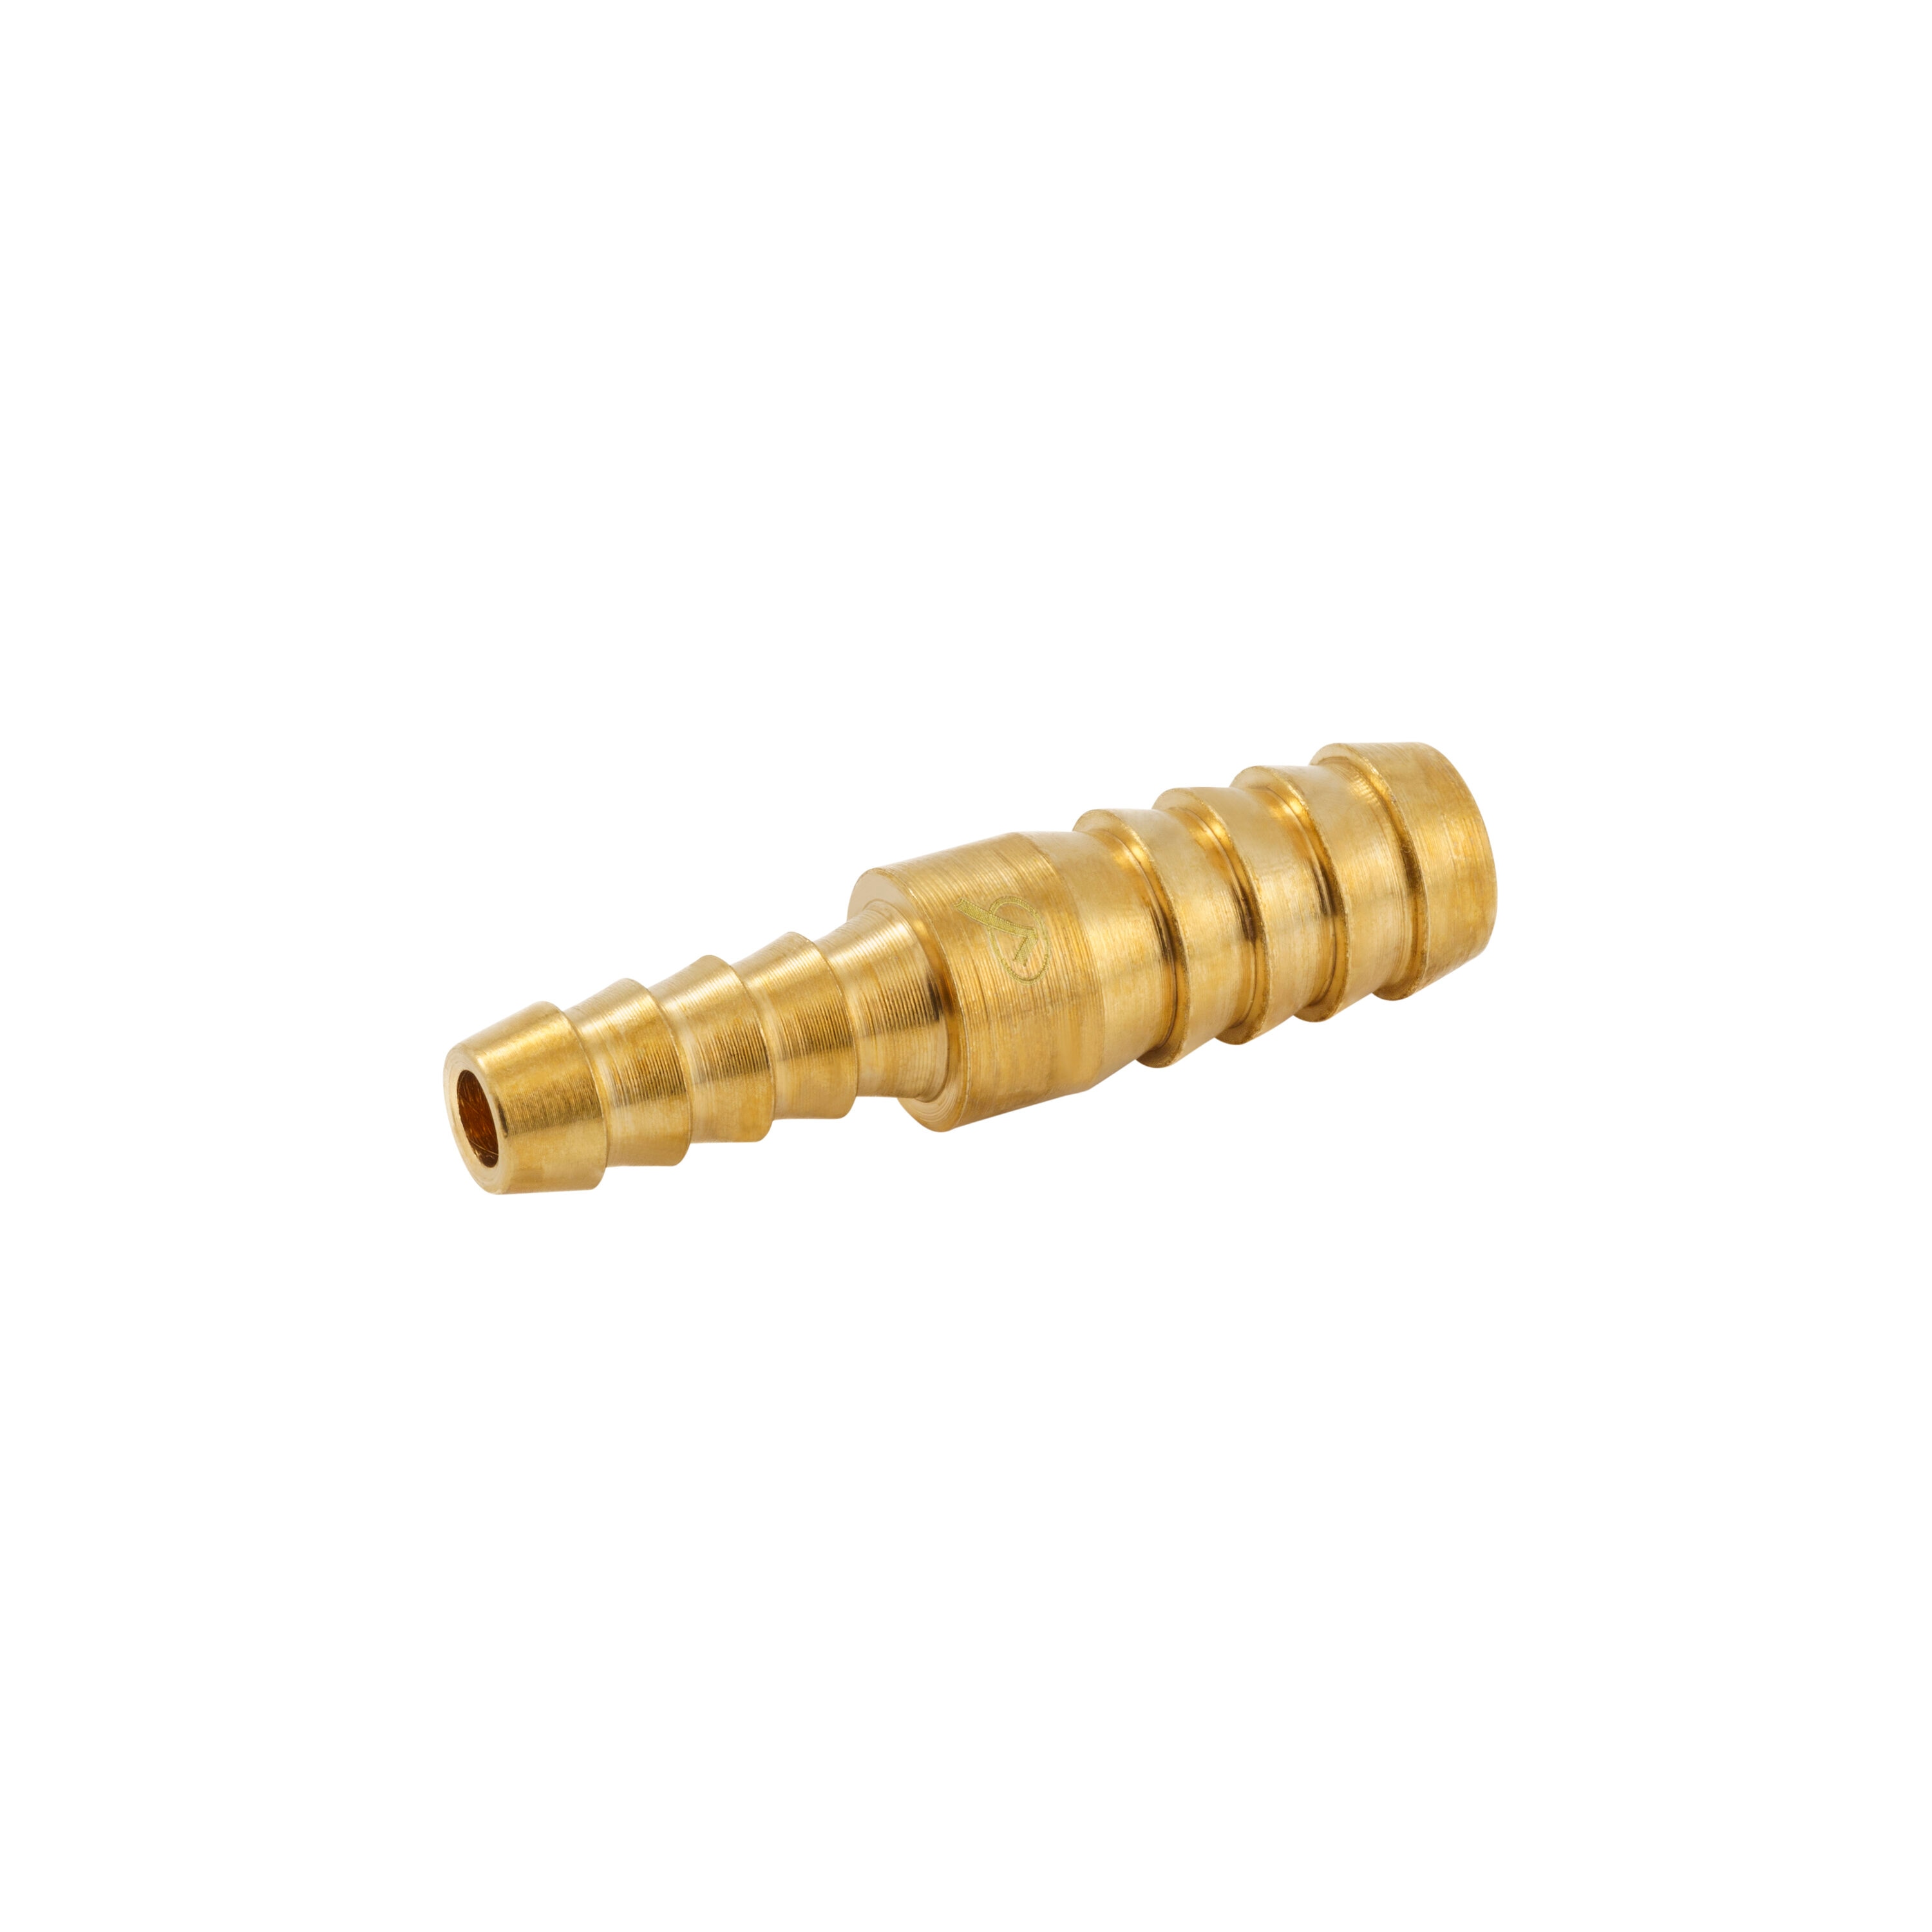 B&K Barbed Splicer Adapter Fitting - Gold - 3/8 x 1/4 Dia - Each